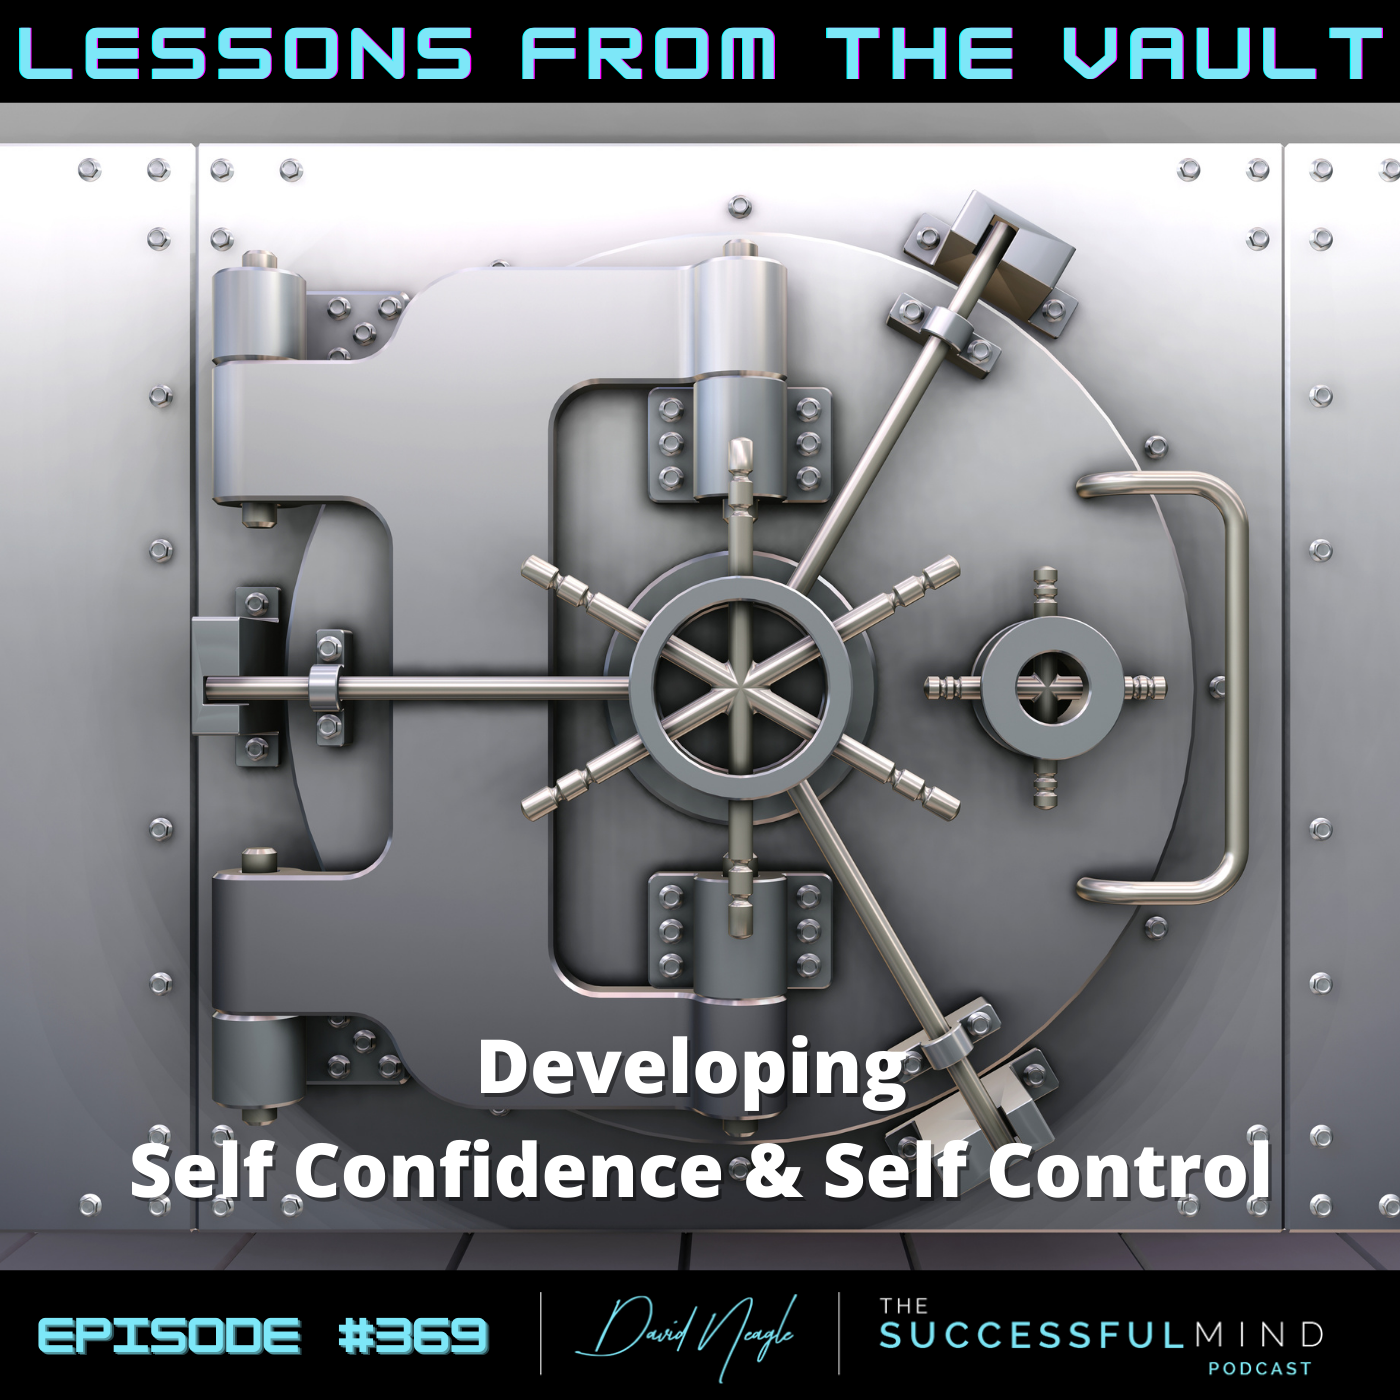 The Successful Mind Podcast- Lessons From The Vault - Developing Self-Confidence & Self-Control